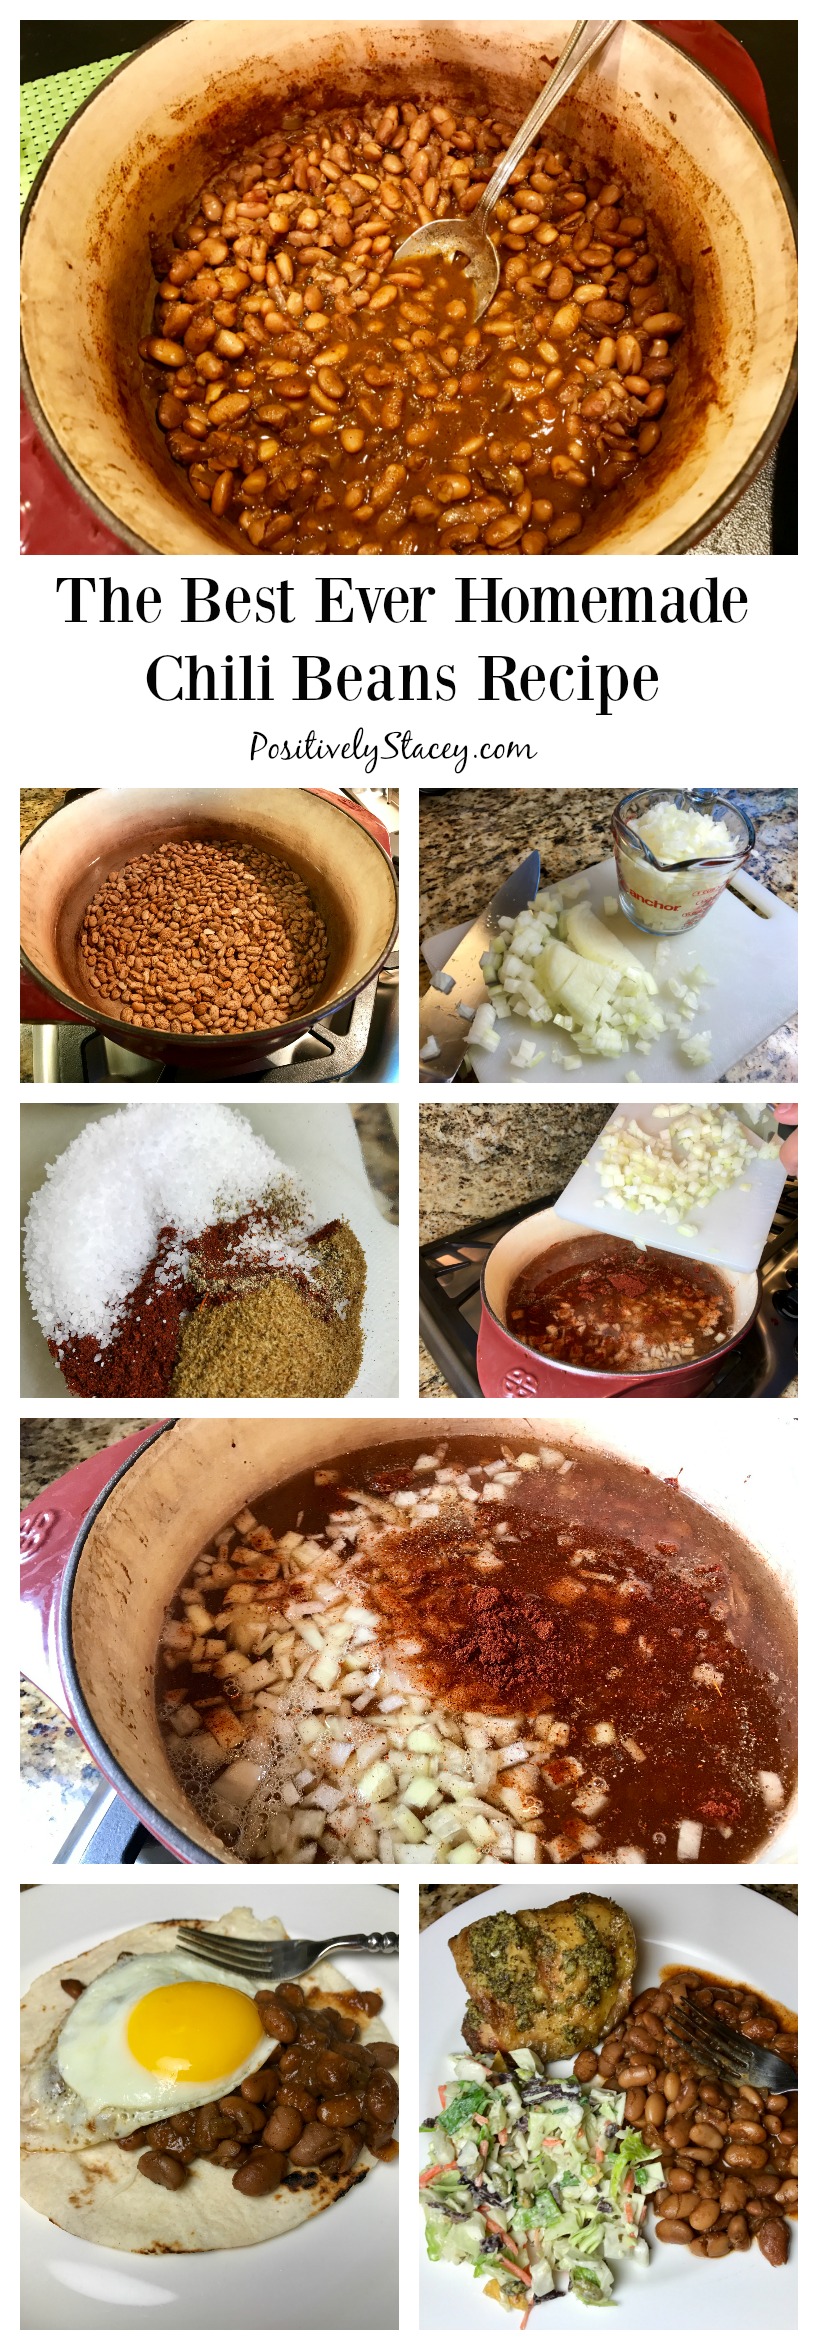 The Best Ever Homemade Chili Beans Recipe